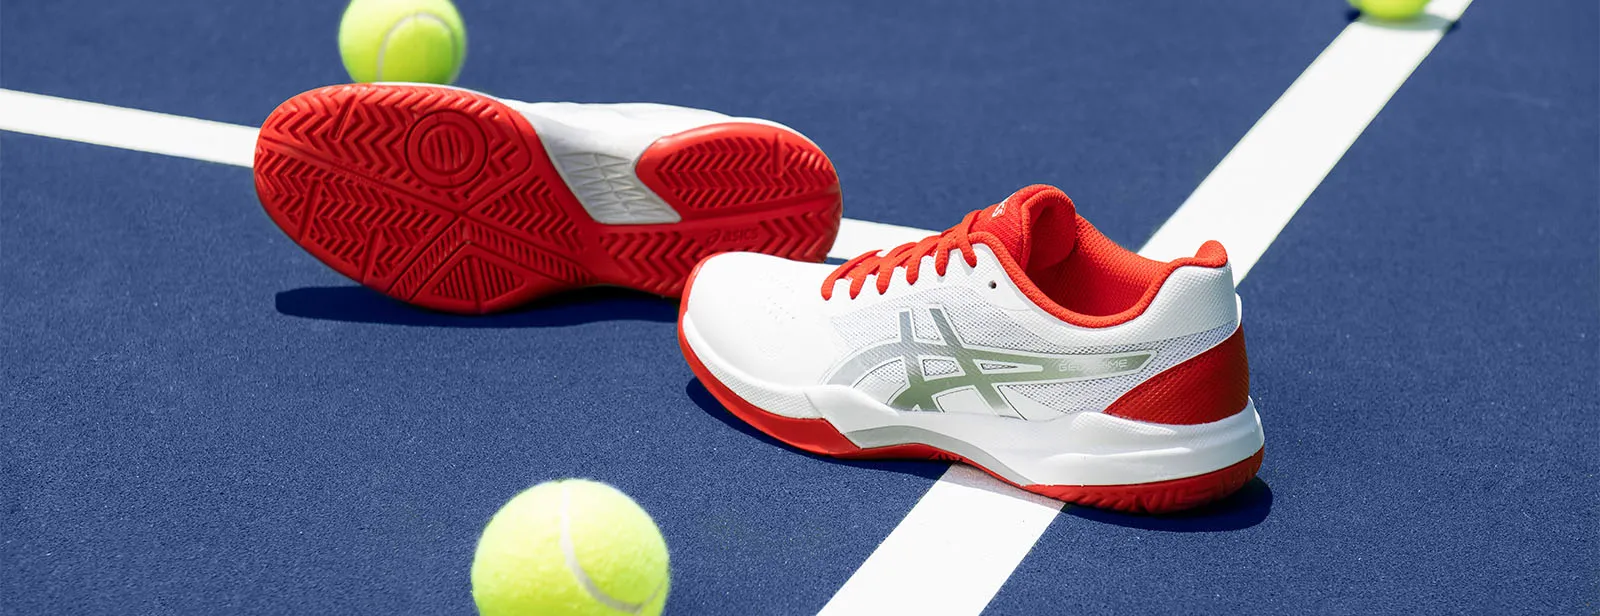 Speed vs. Stability: Choosing the Right Tennis Shoe